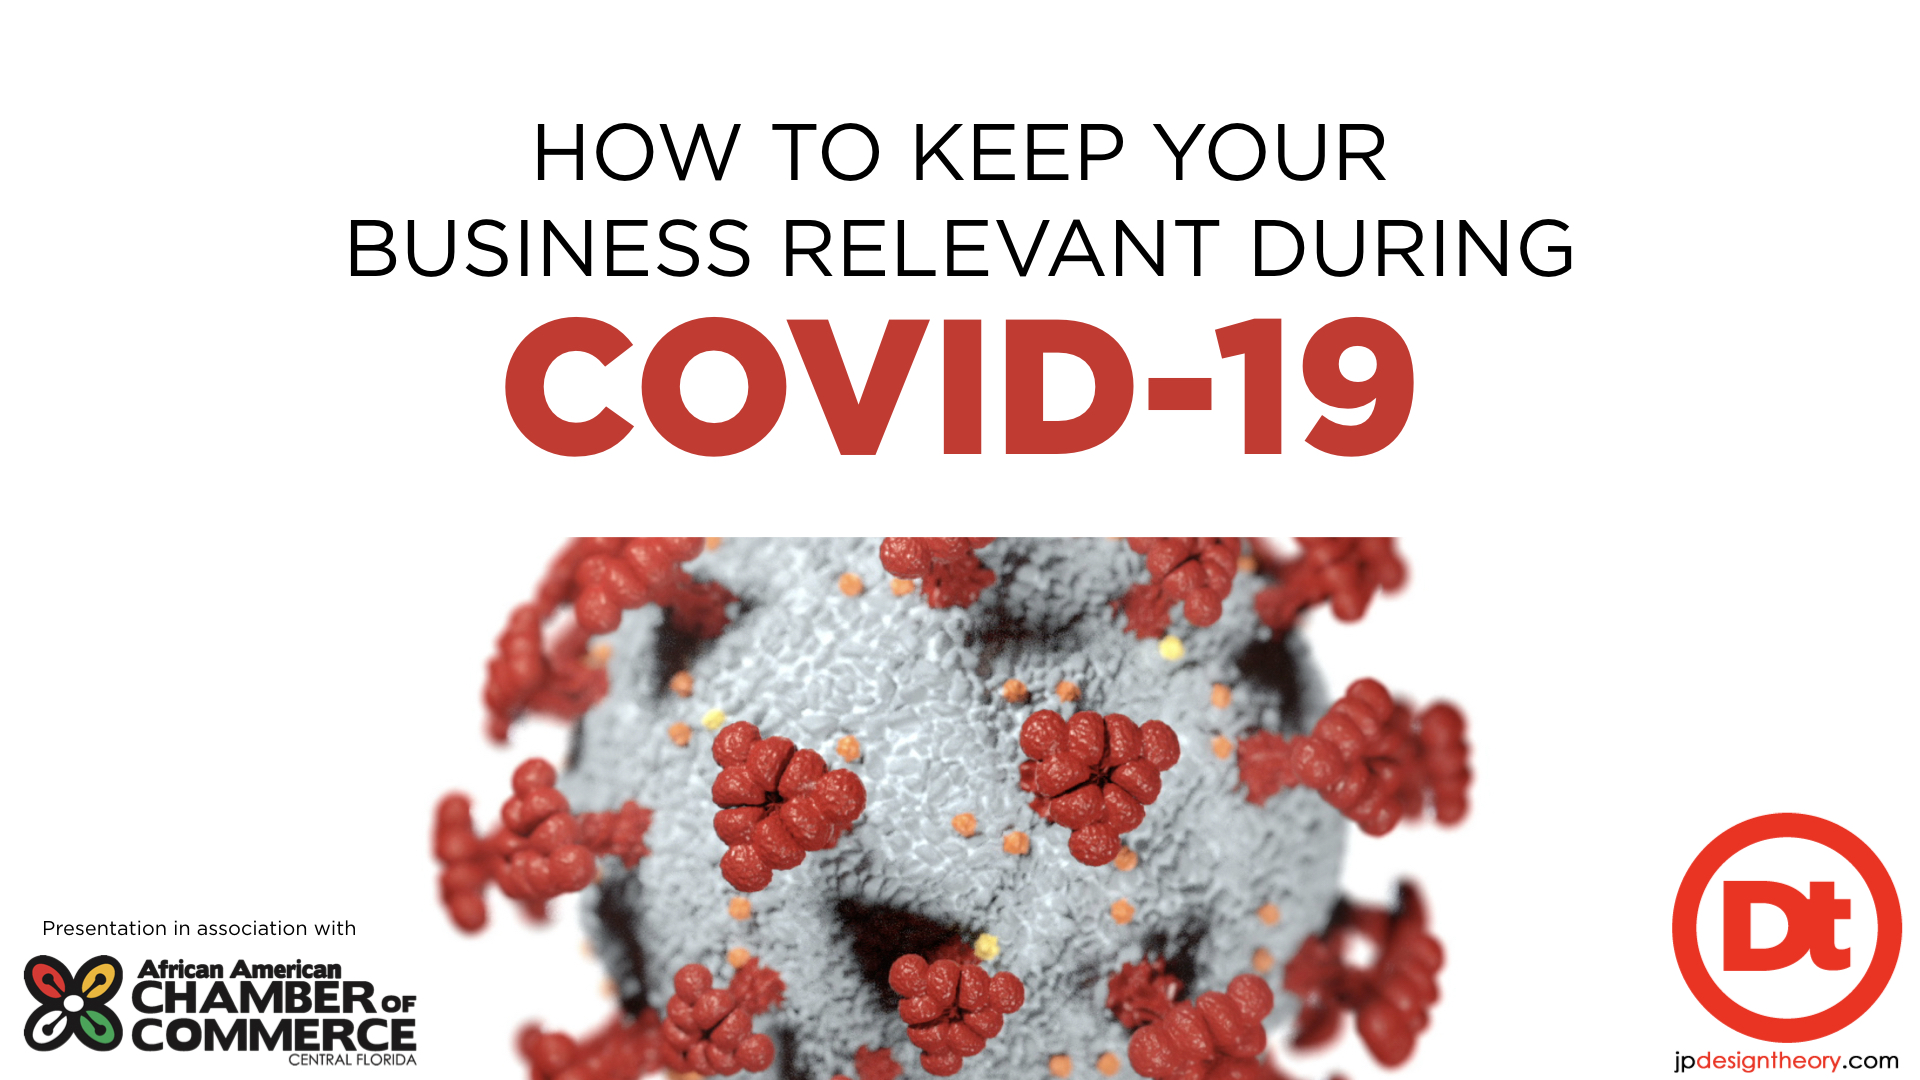 How to Keep Your Business Relevant During COVID-19 - Slide 1